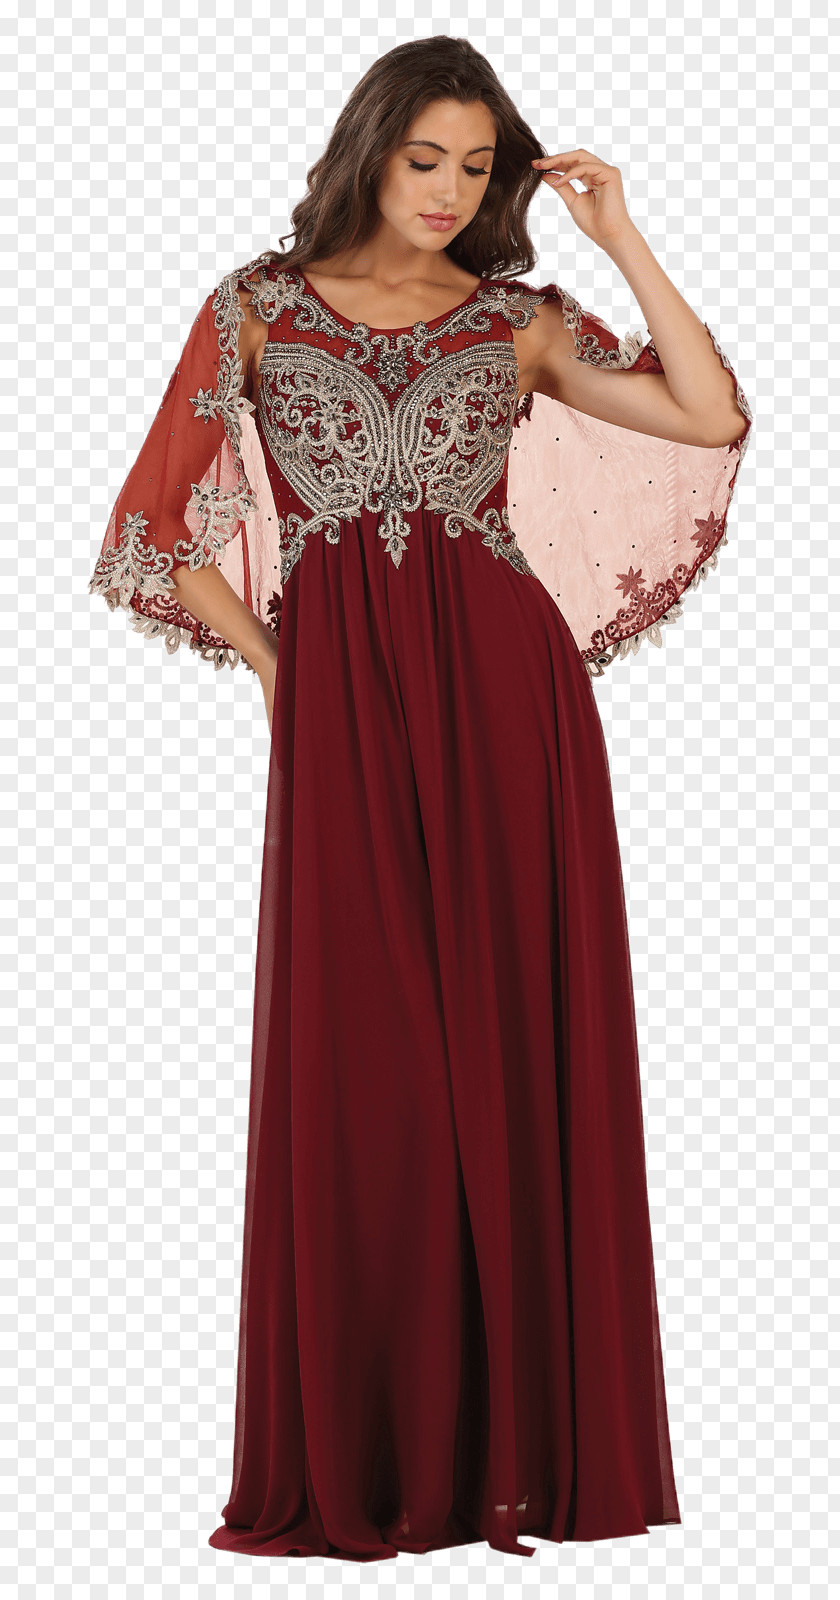 Layered Clothing Evening Gown Cocktail Dress Formal Wear PNG